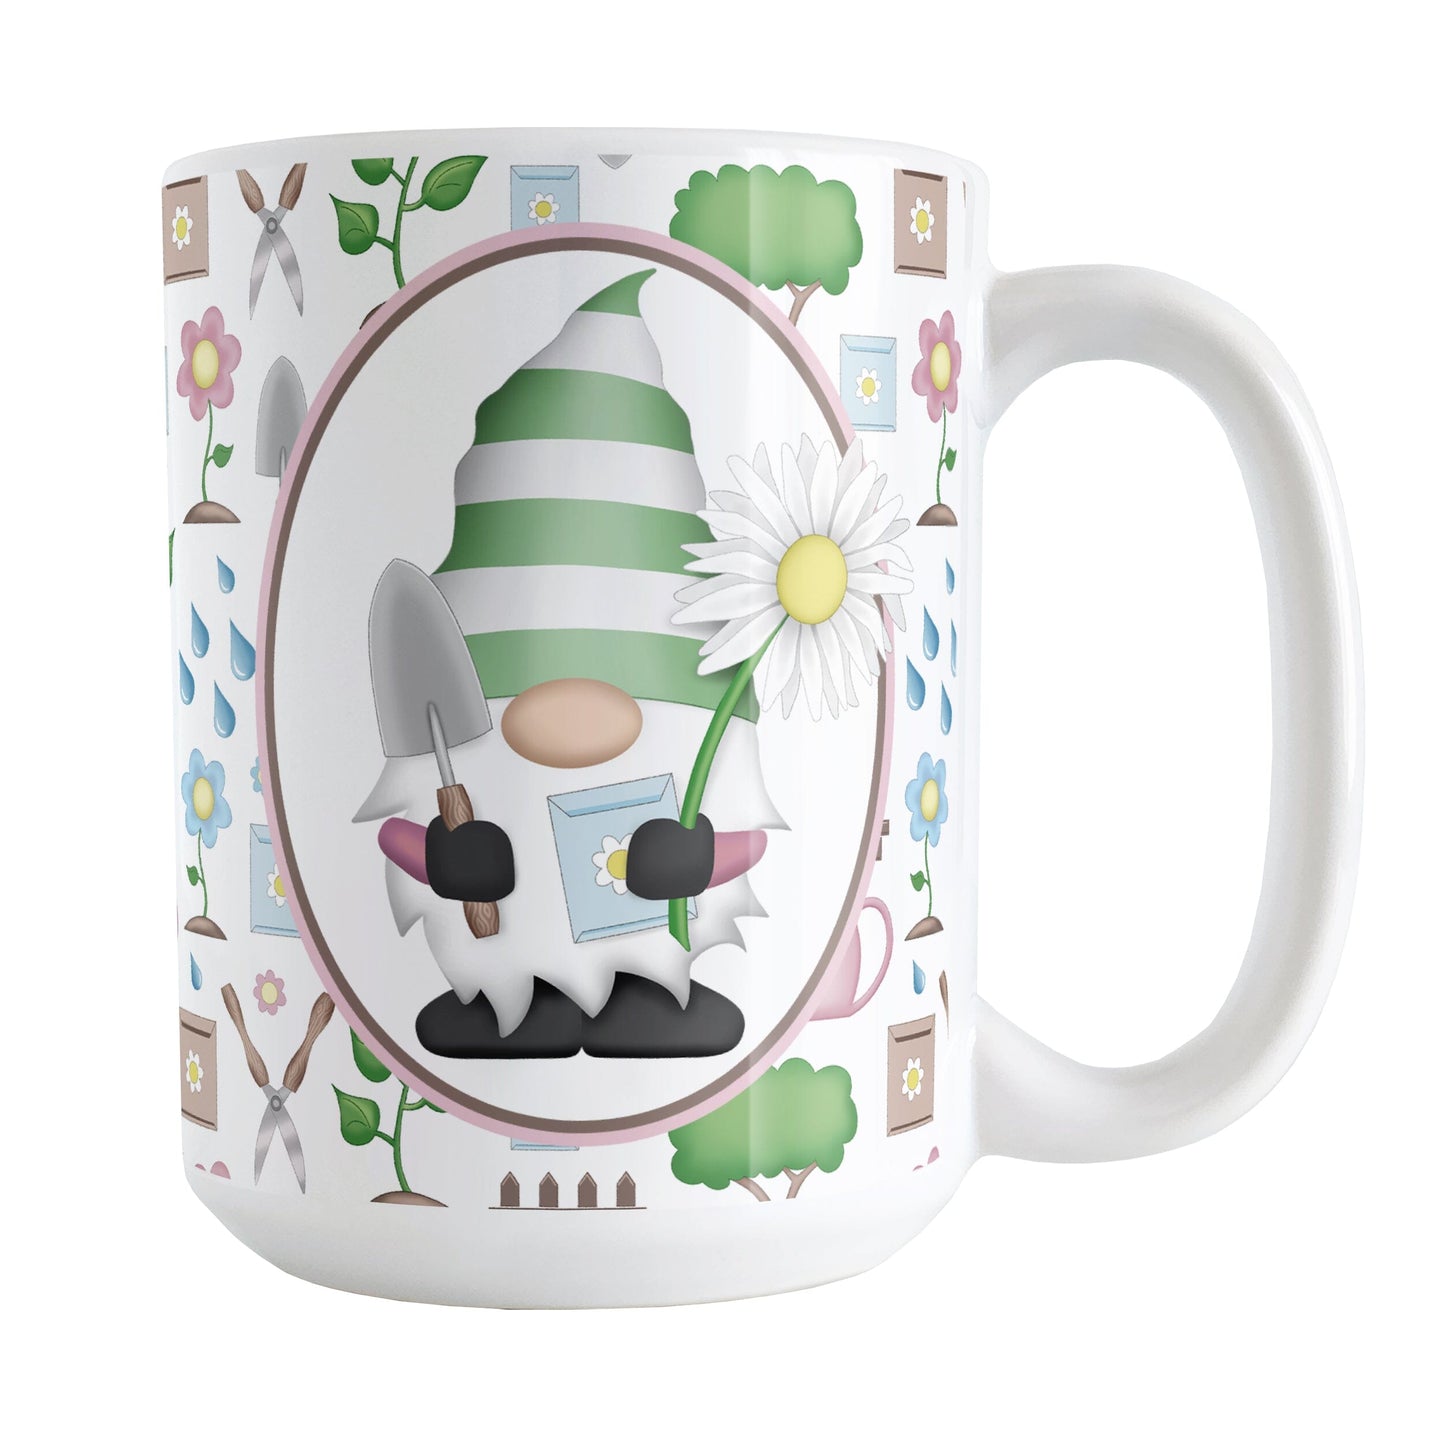 Spring Gnome Gardening Pattern Mug (15oz) at Amy's Coffee Mugs. A ceramic coffee mug designed with an adorable spring gardening gnome holding  an oversized daisy in a white oval over a springtime gardening pattern with trees, plants, flowers, seed packets, watering cans, fences, and gardening tools in spring colors such as pink, blue, green, and brown. 